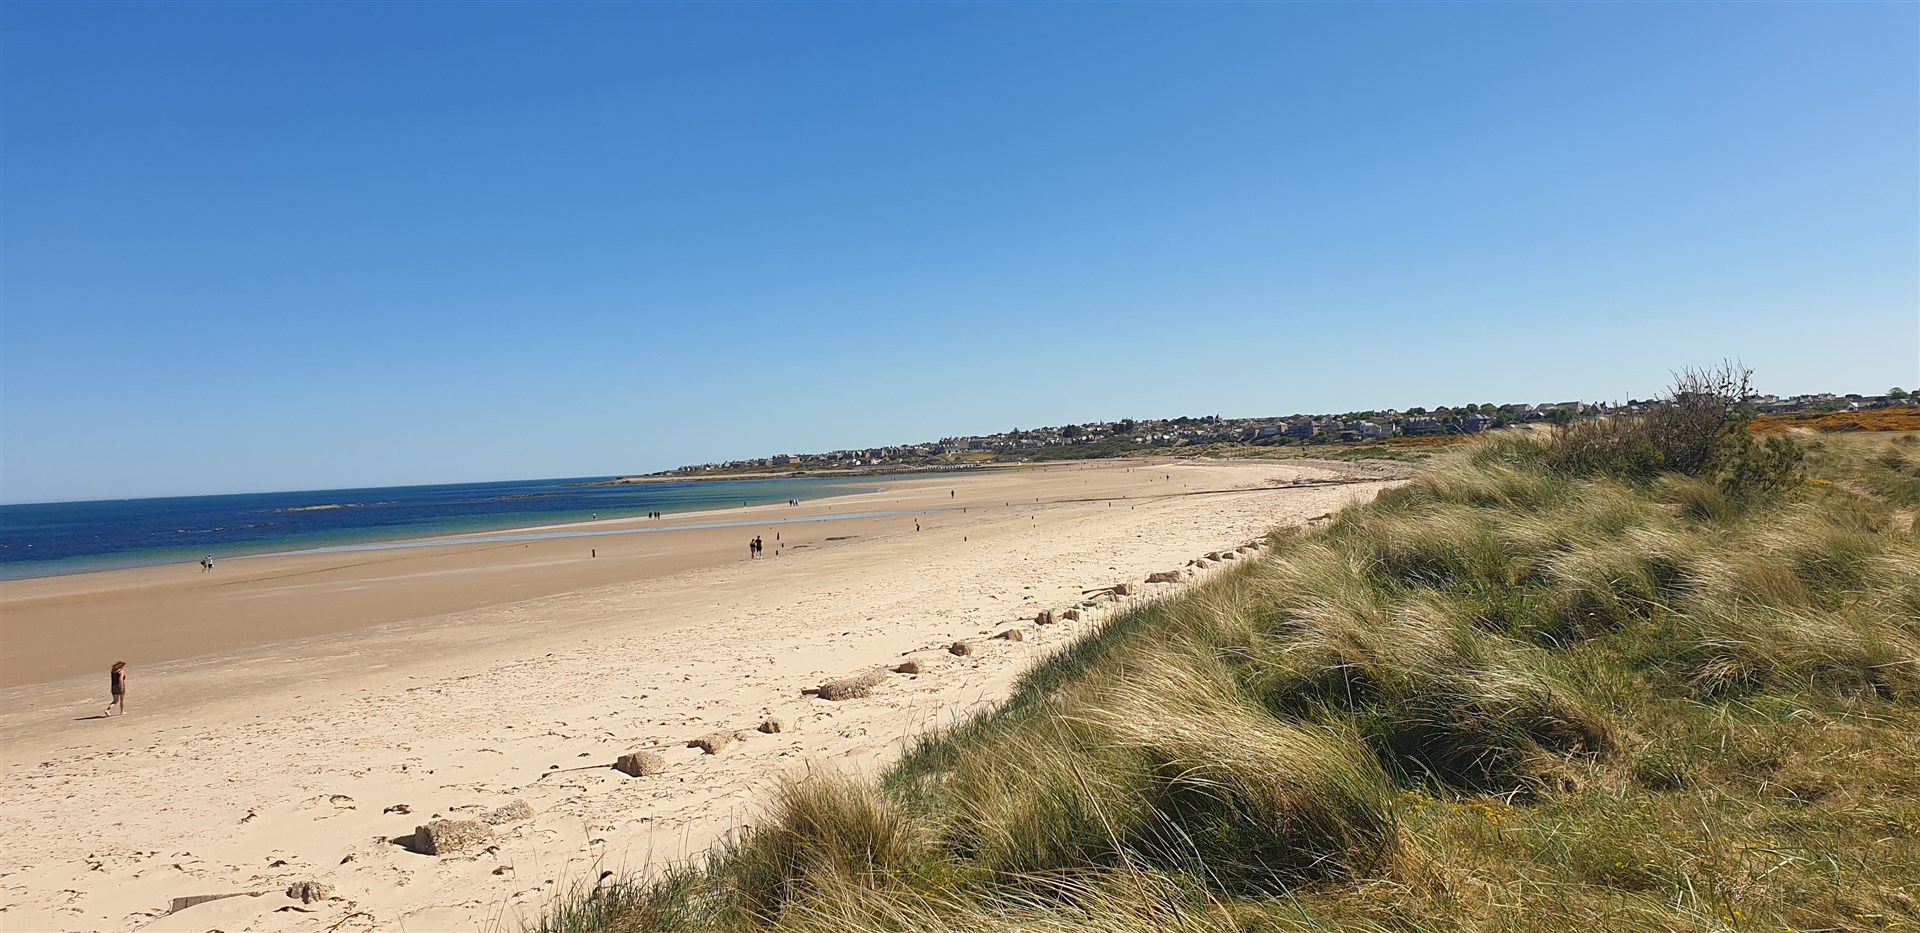 The west beach at Lossiemouth was sun-kissed on Sunday.